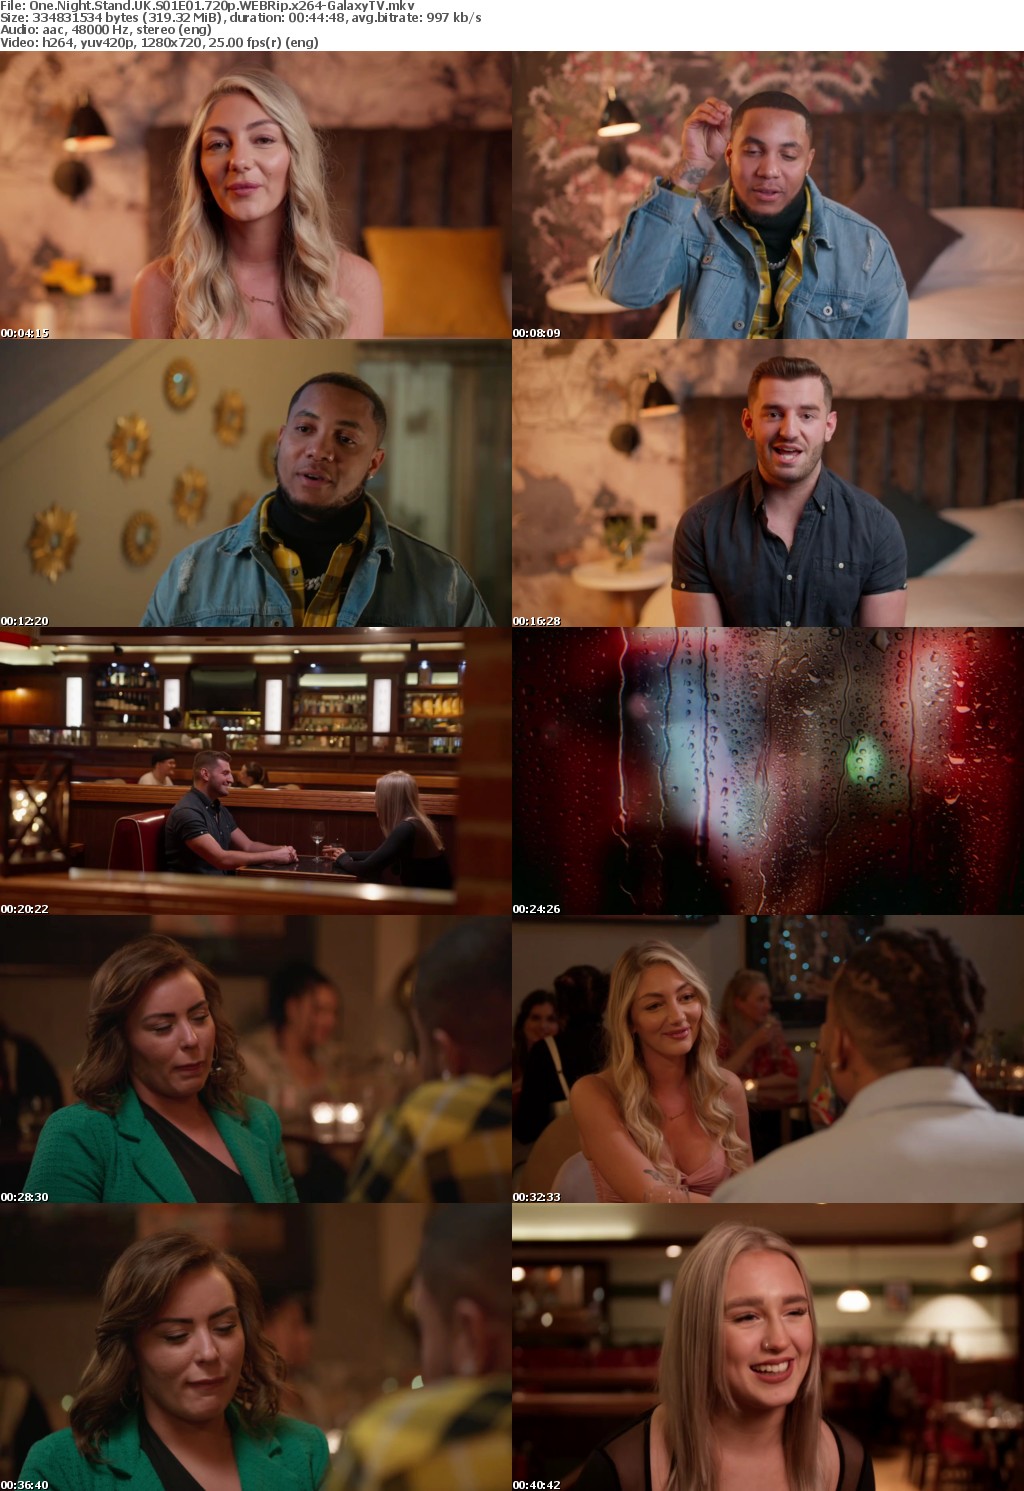 One Night Stand UK S01 COMPLETE 720p WEBRip x264-GalaxyTV